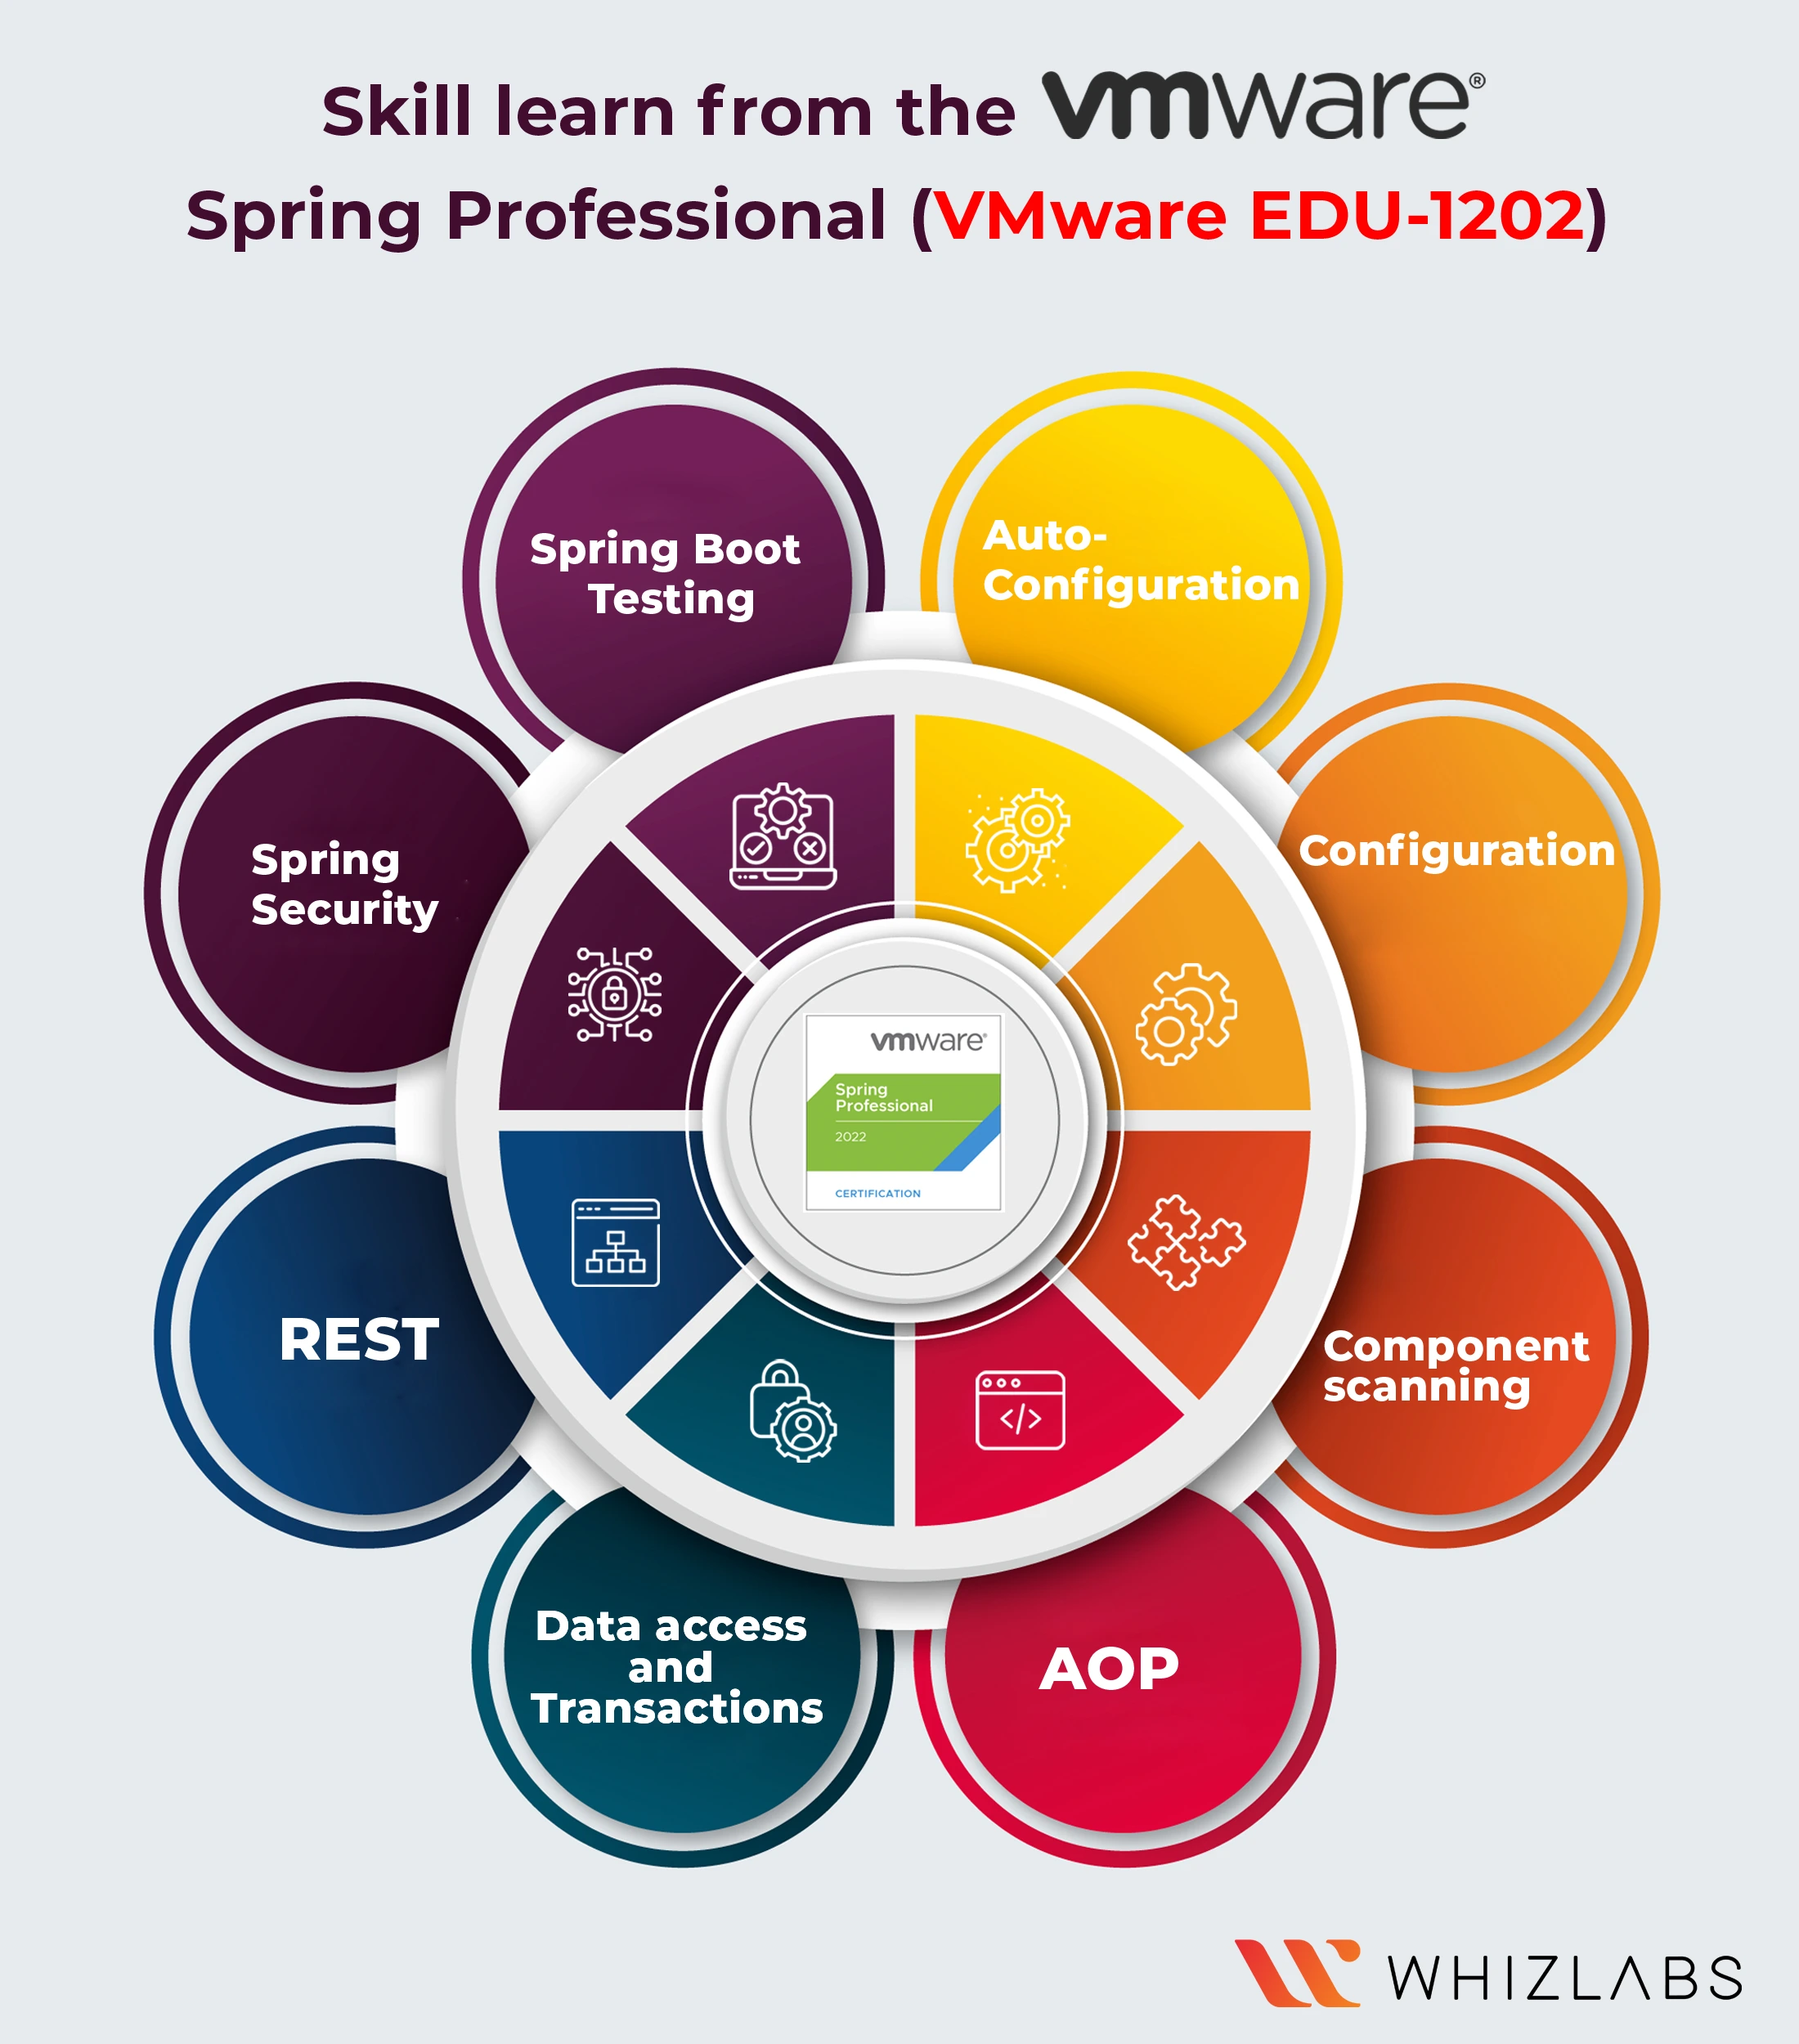 Spring Professional Certification